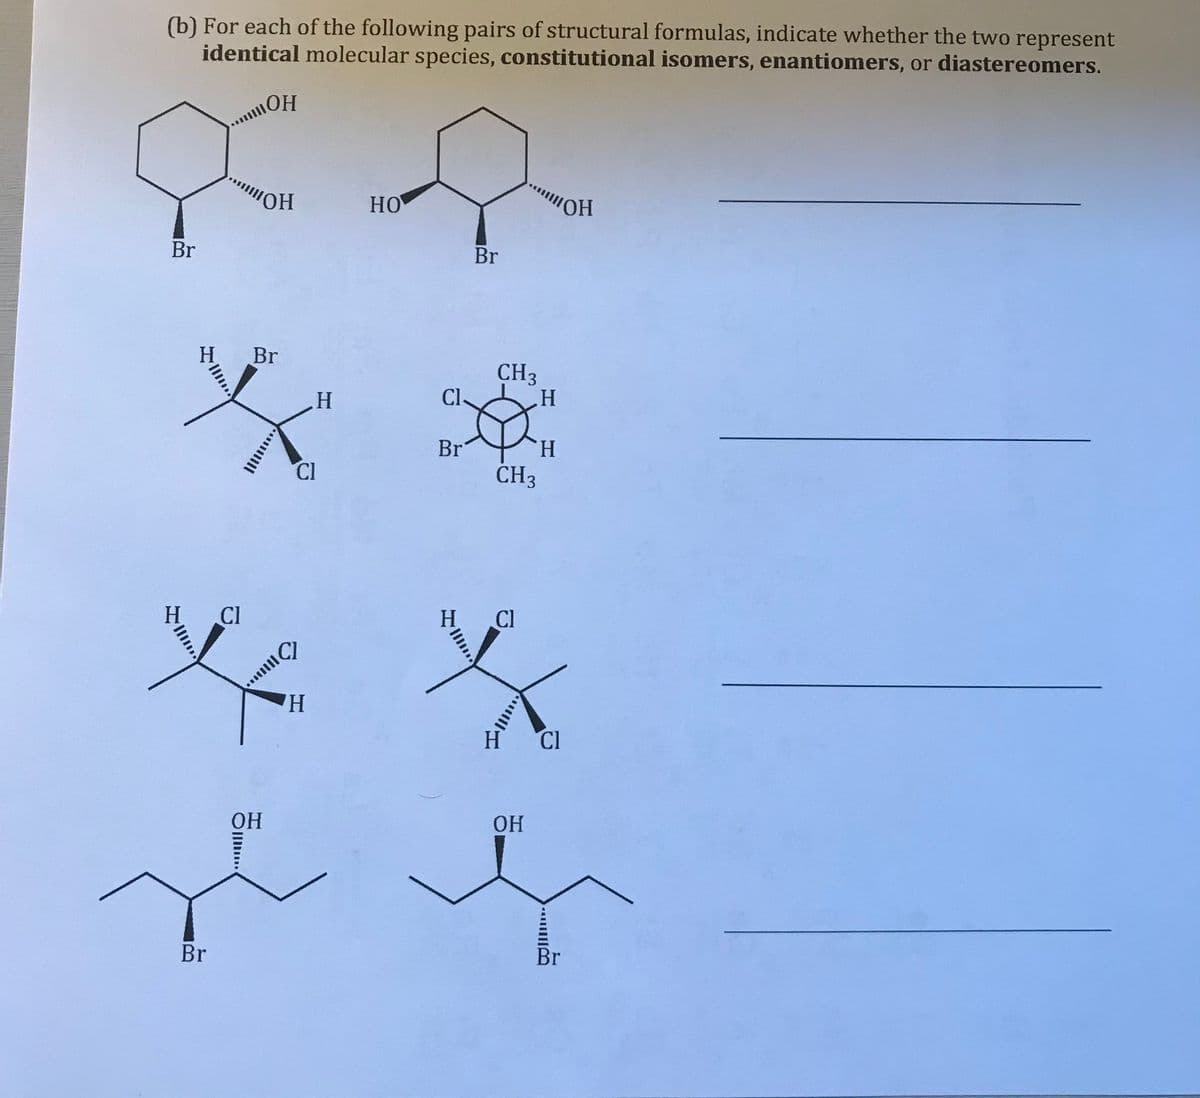 (b) For each of the following pairs of structural formulas, indicate whether the two represent
identical molecular species, constitutional isomers, enantiomers, or diastereomers.
HOW
HO
HOlim
Br
Br
H
Br
CH3
H
Cl-
H
Br
H.
Cl
CH3
CI
H
Cl
H,
H
Cl
OH
Br
Br
